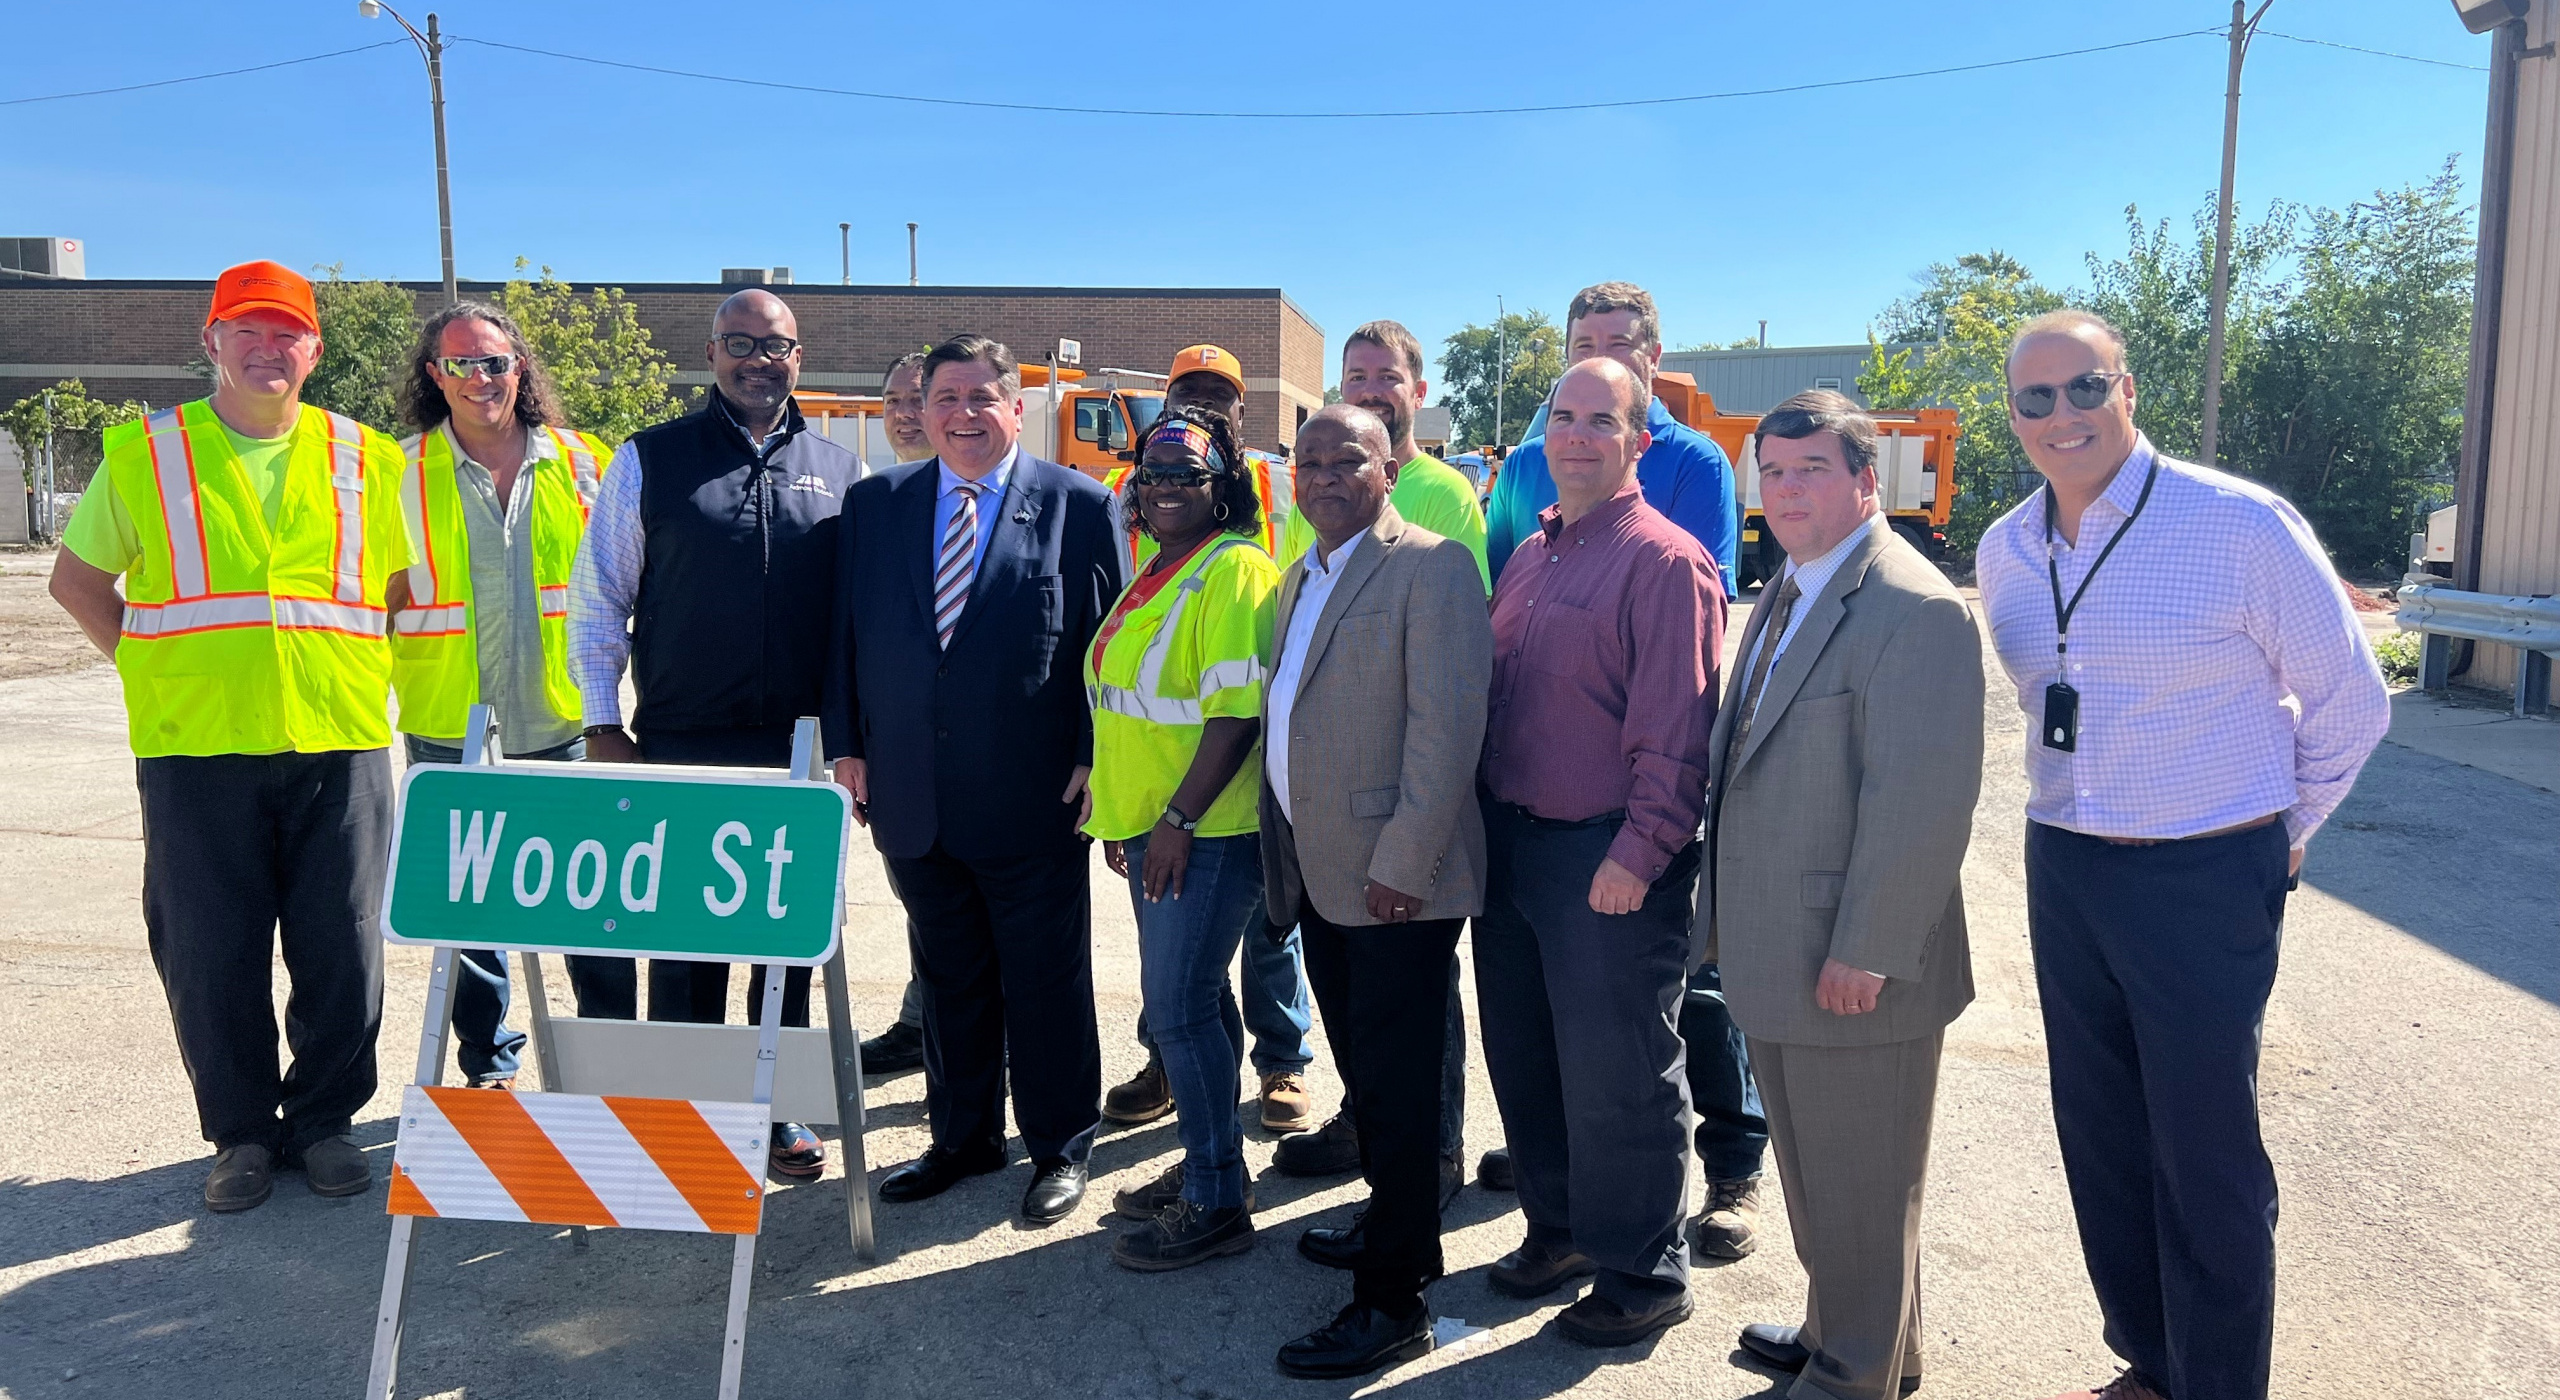 Ardmore Roderick was Present for Governor Pritzker’s Announcement of the Wood Street and Ashland Avenue Improvements